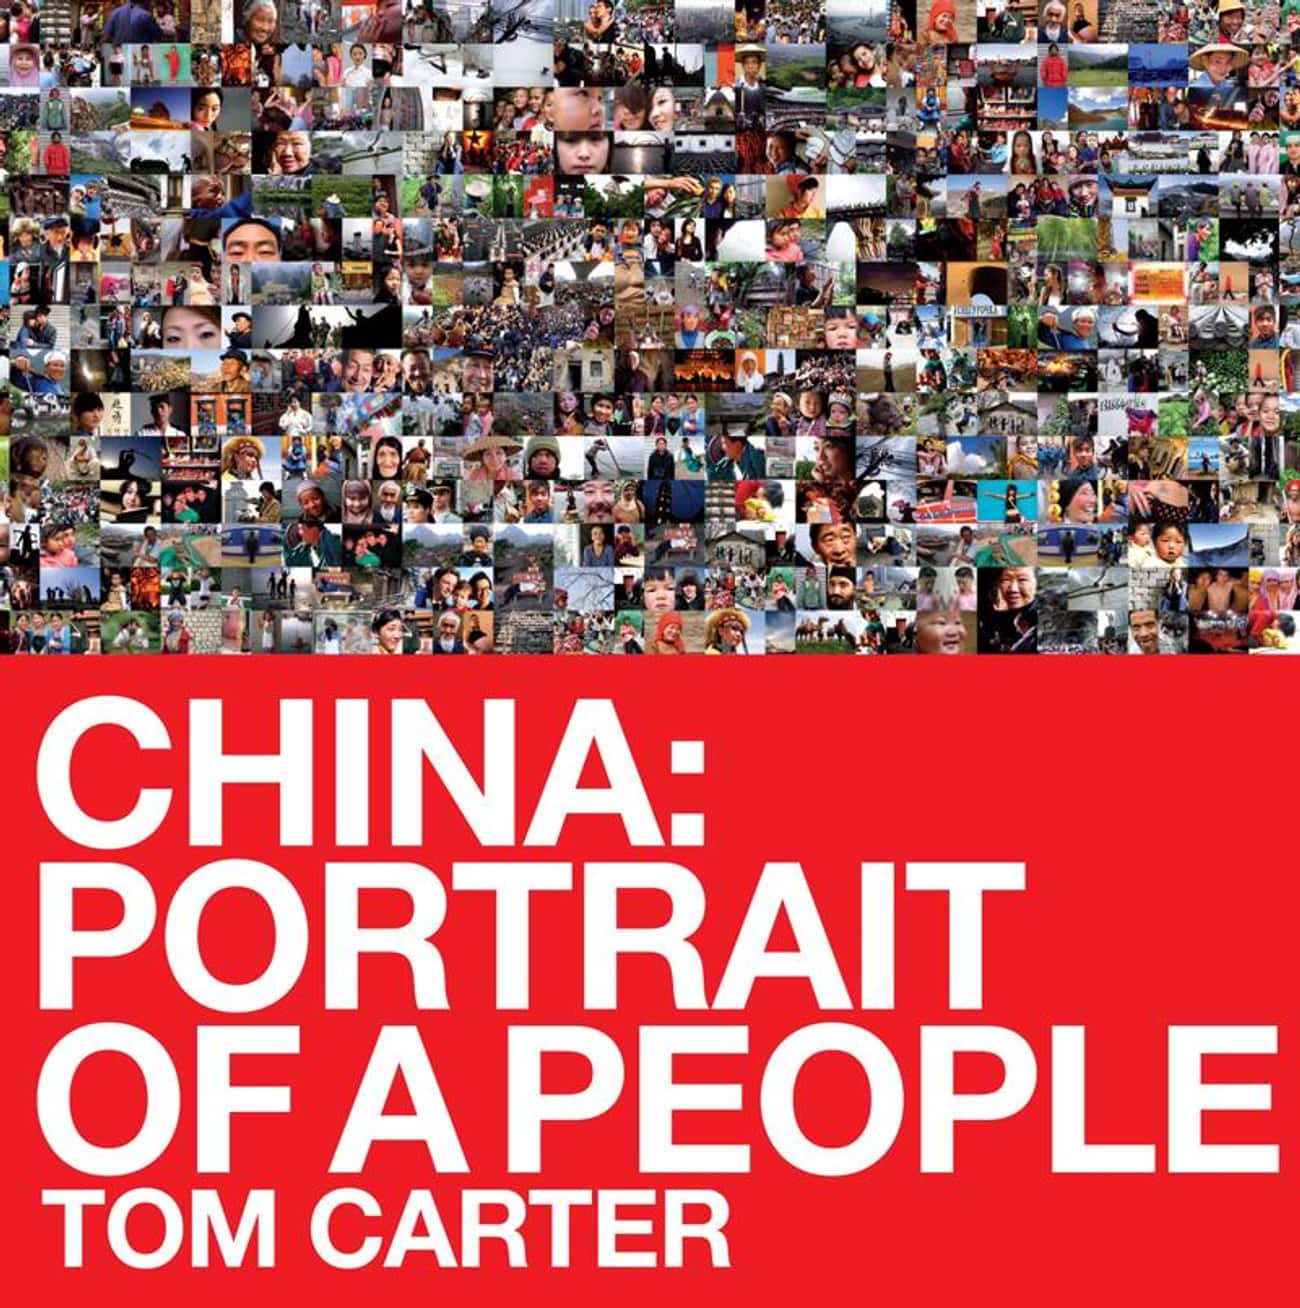 CHINA: Portrait of a People by Tom Carter